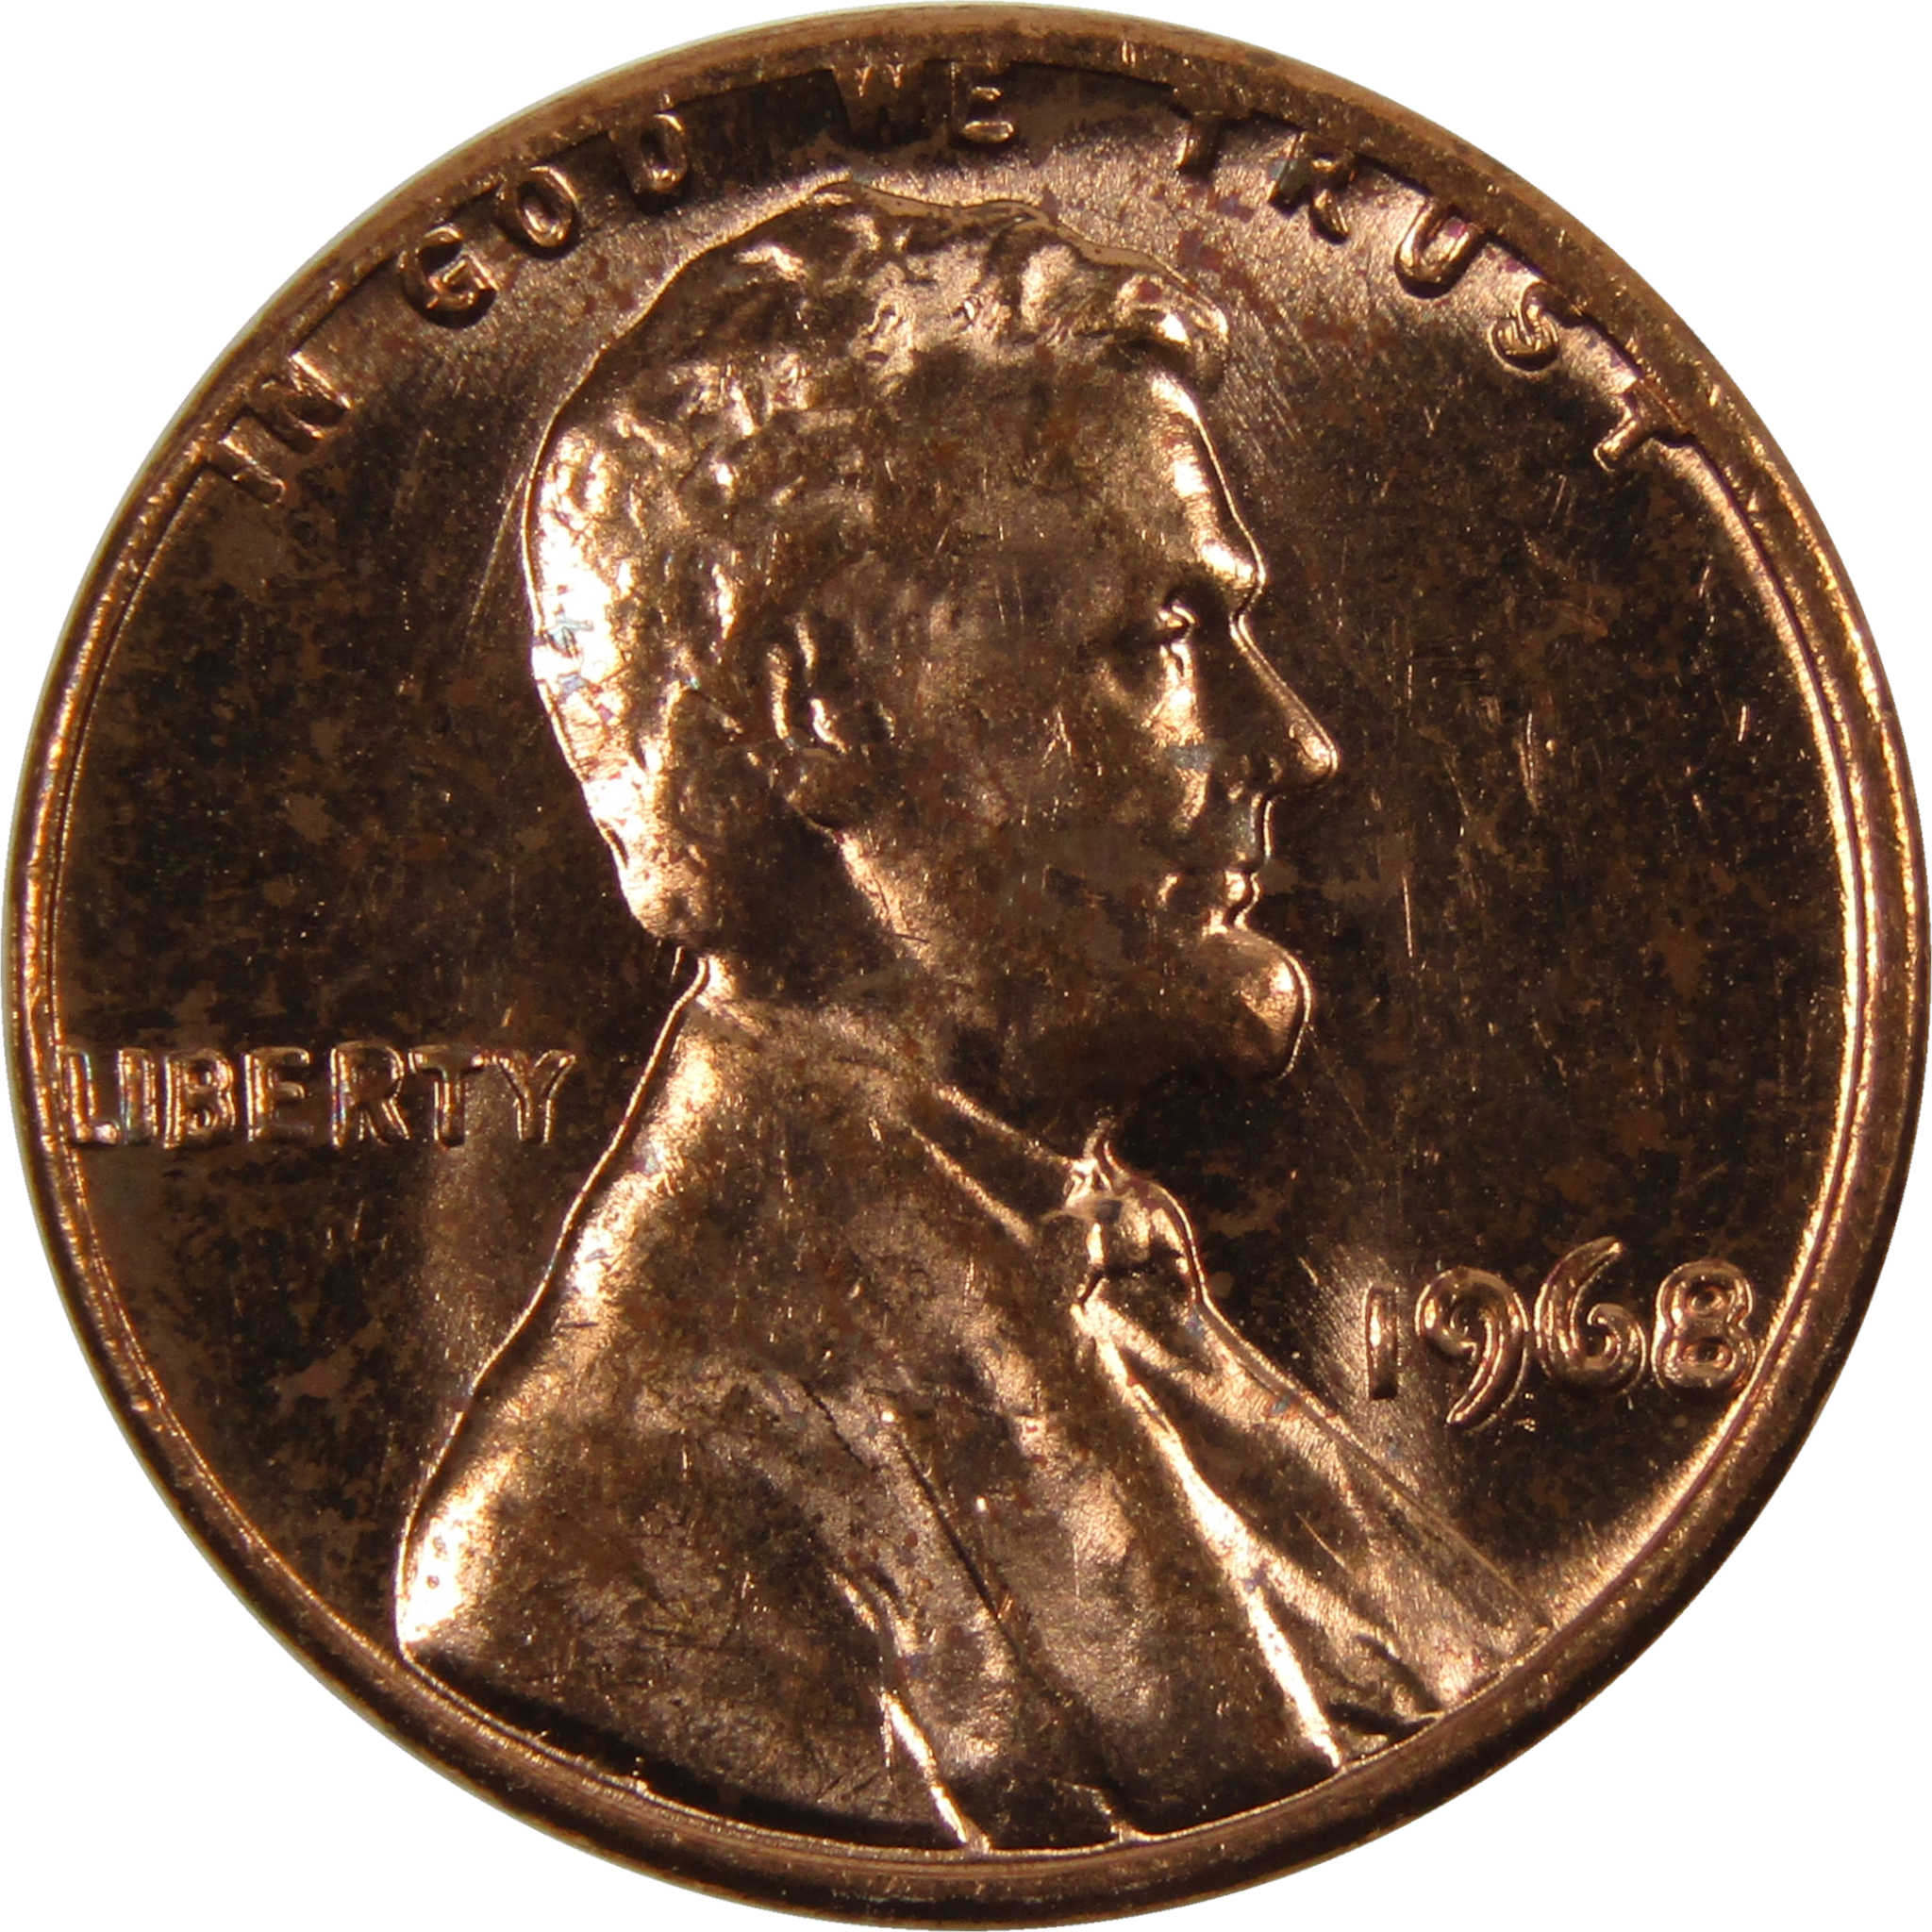 1968 Lincoln Memorial Cent BU Uncirculated Penny 1c Coin